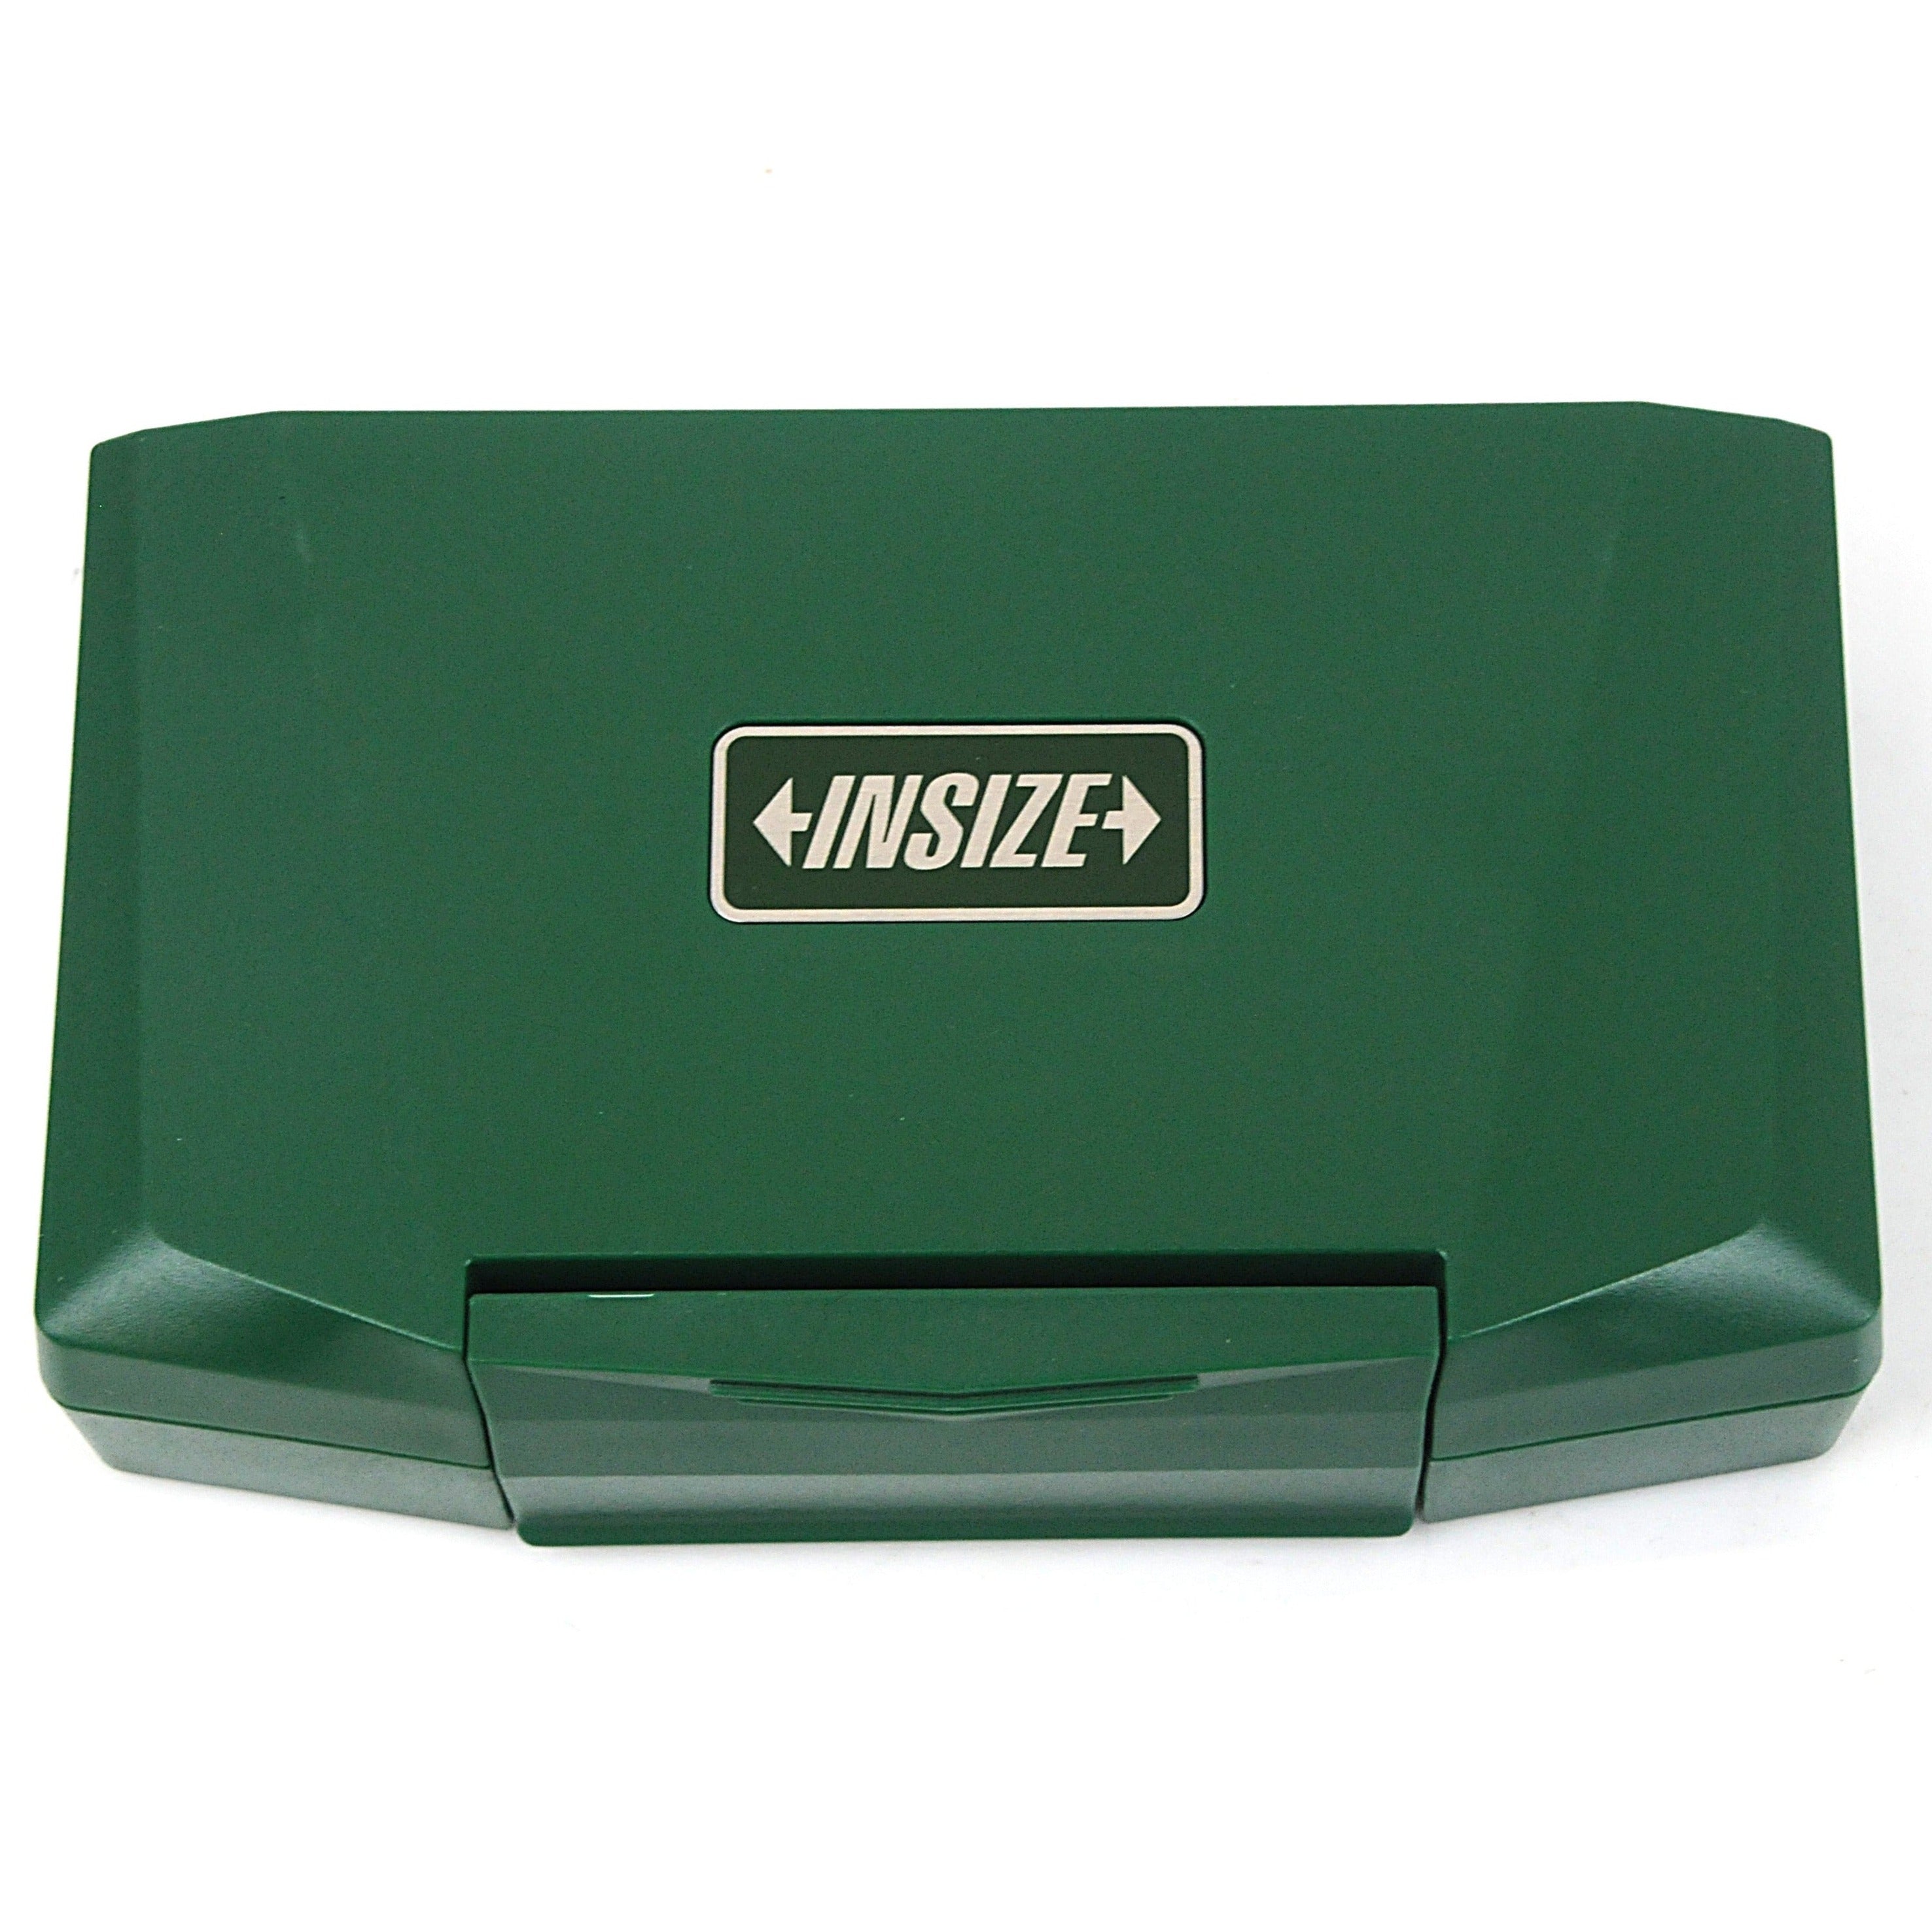 Insize Imperial Dial Indicator 0.03" x 0.0005" Range Series 2380-35